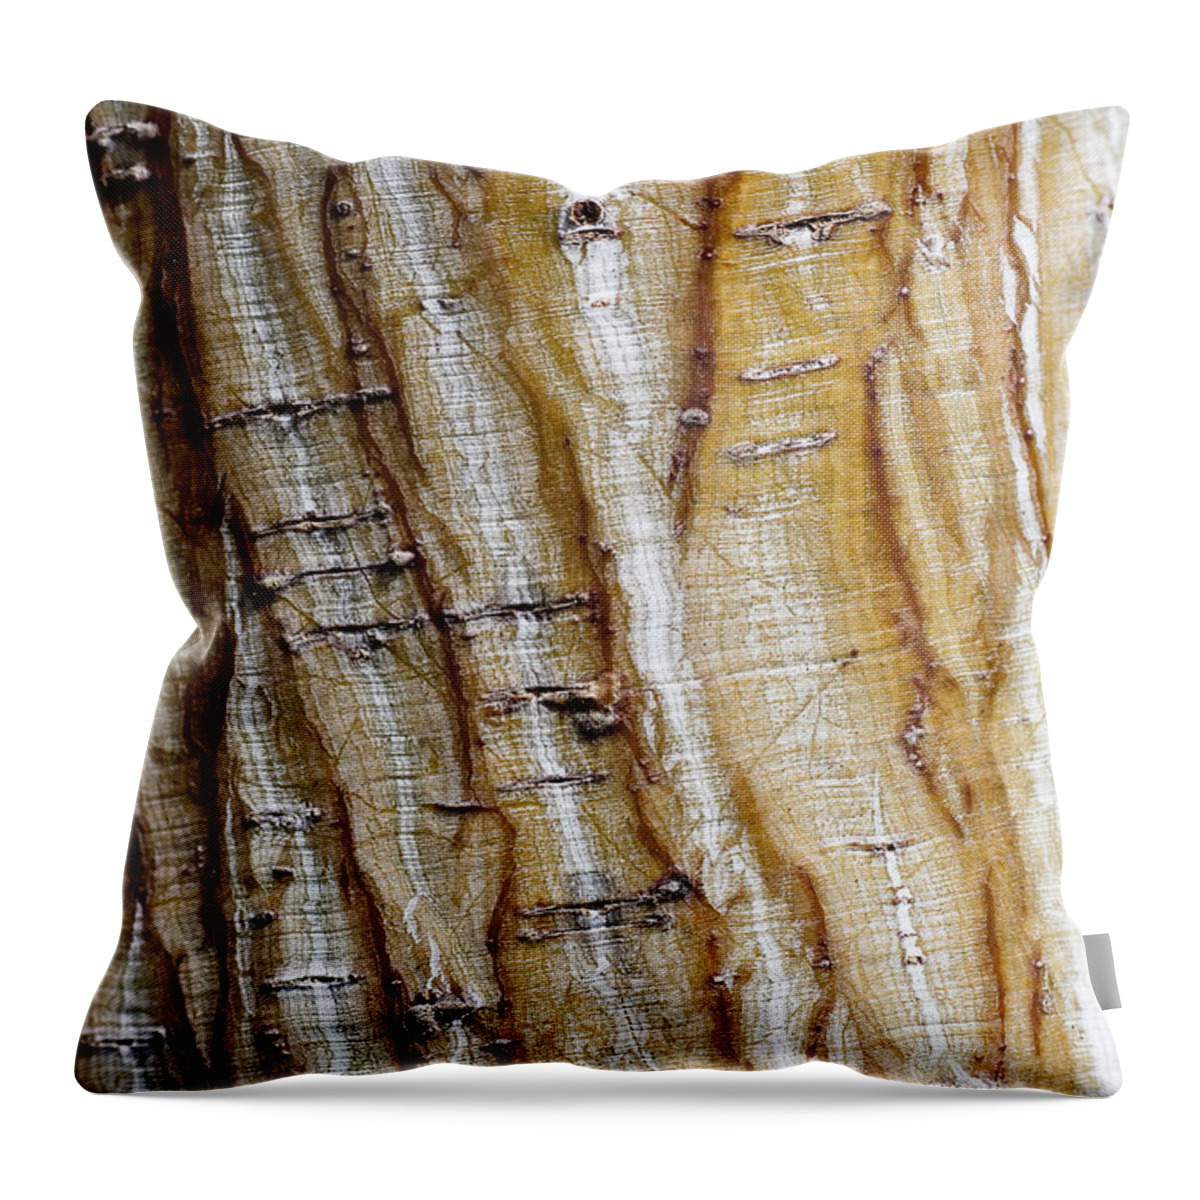 Arboretum Throw Pillow featuring the photograph Striped maple by Steven Ralser